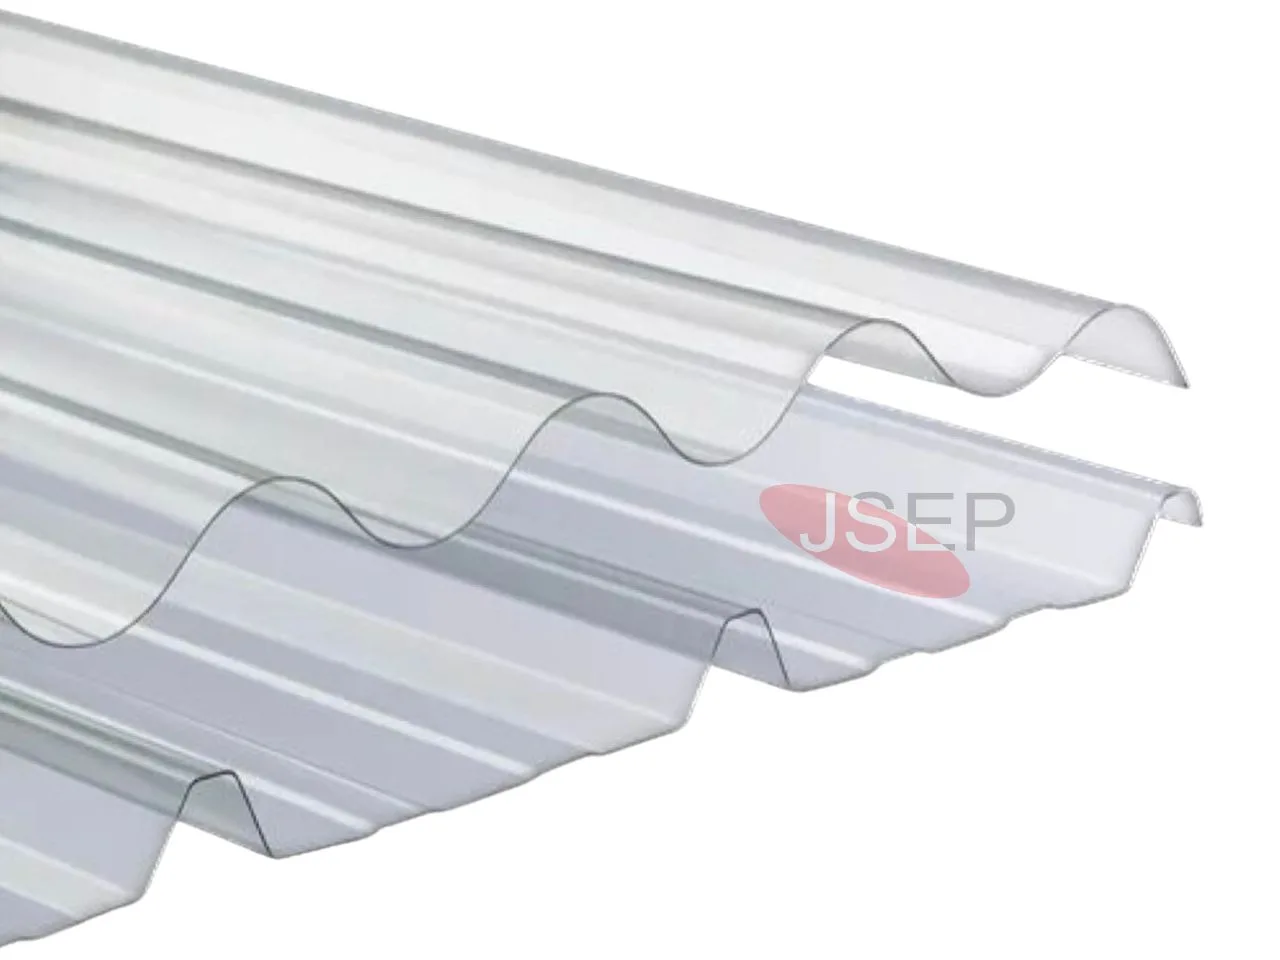 Polycarbonate roofing Sheet Suppliers faridabad,Haryana .India